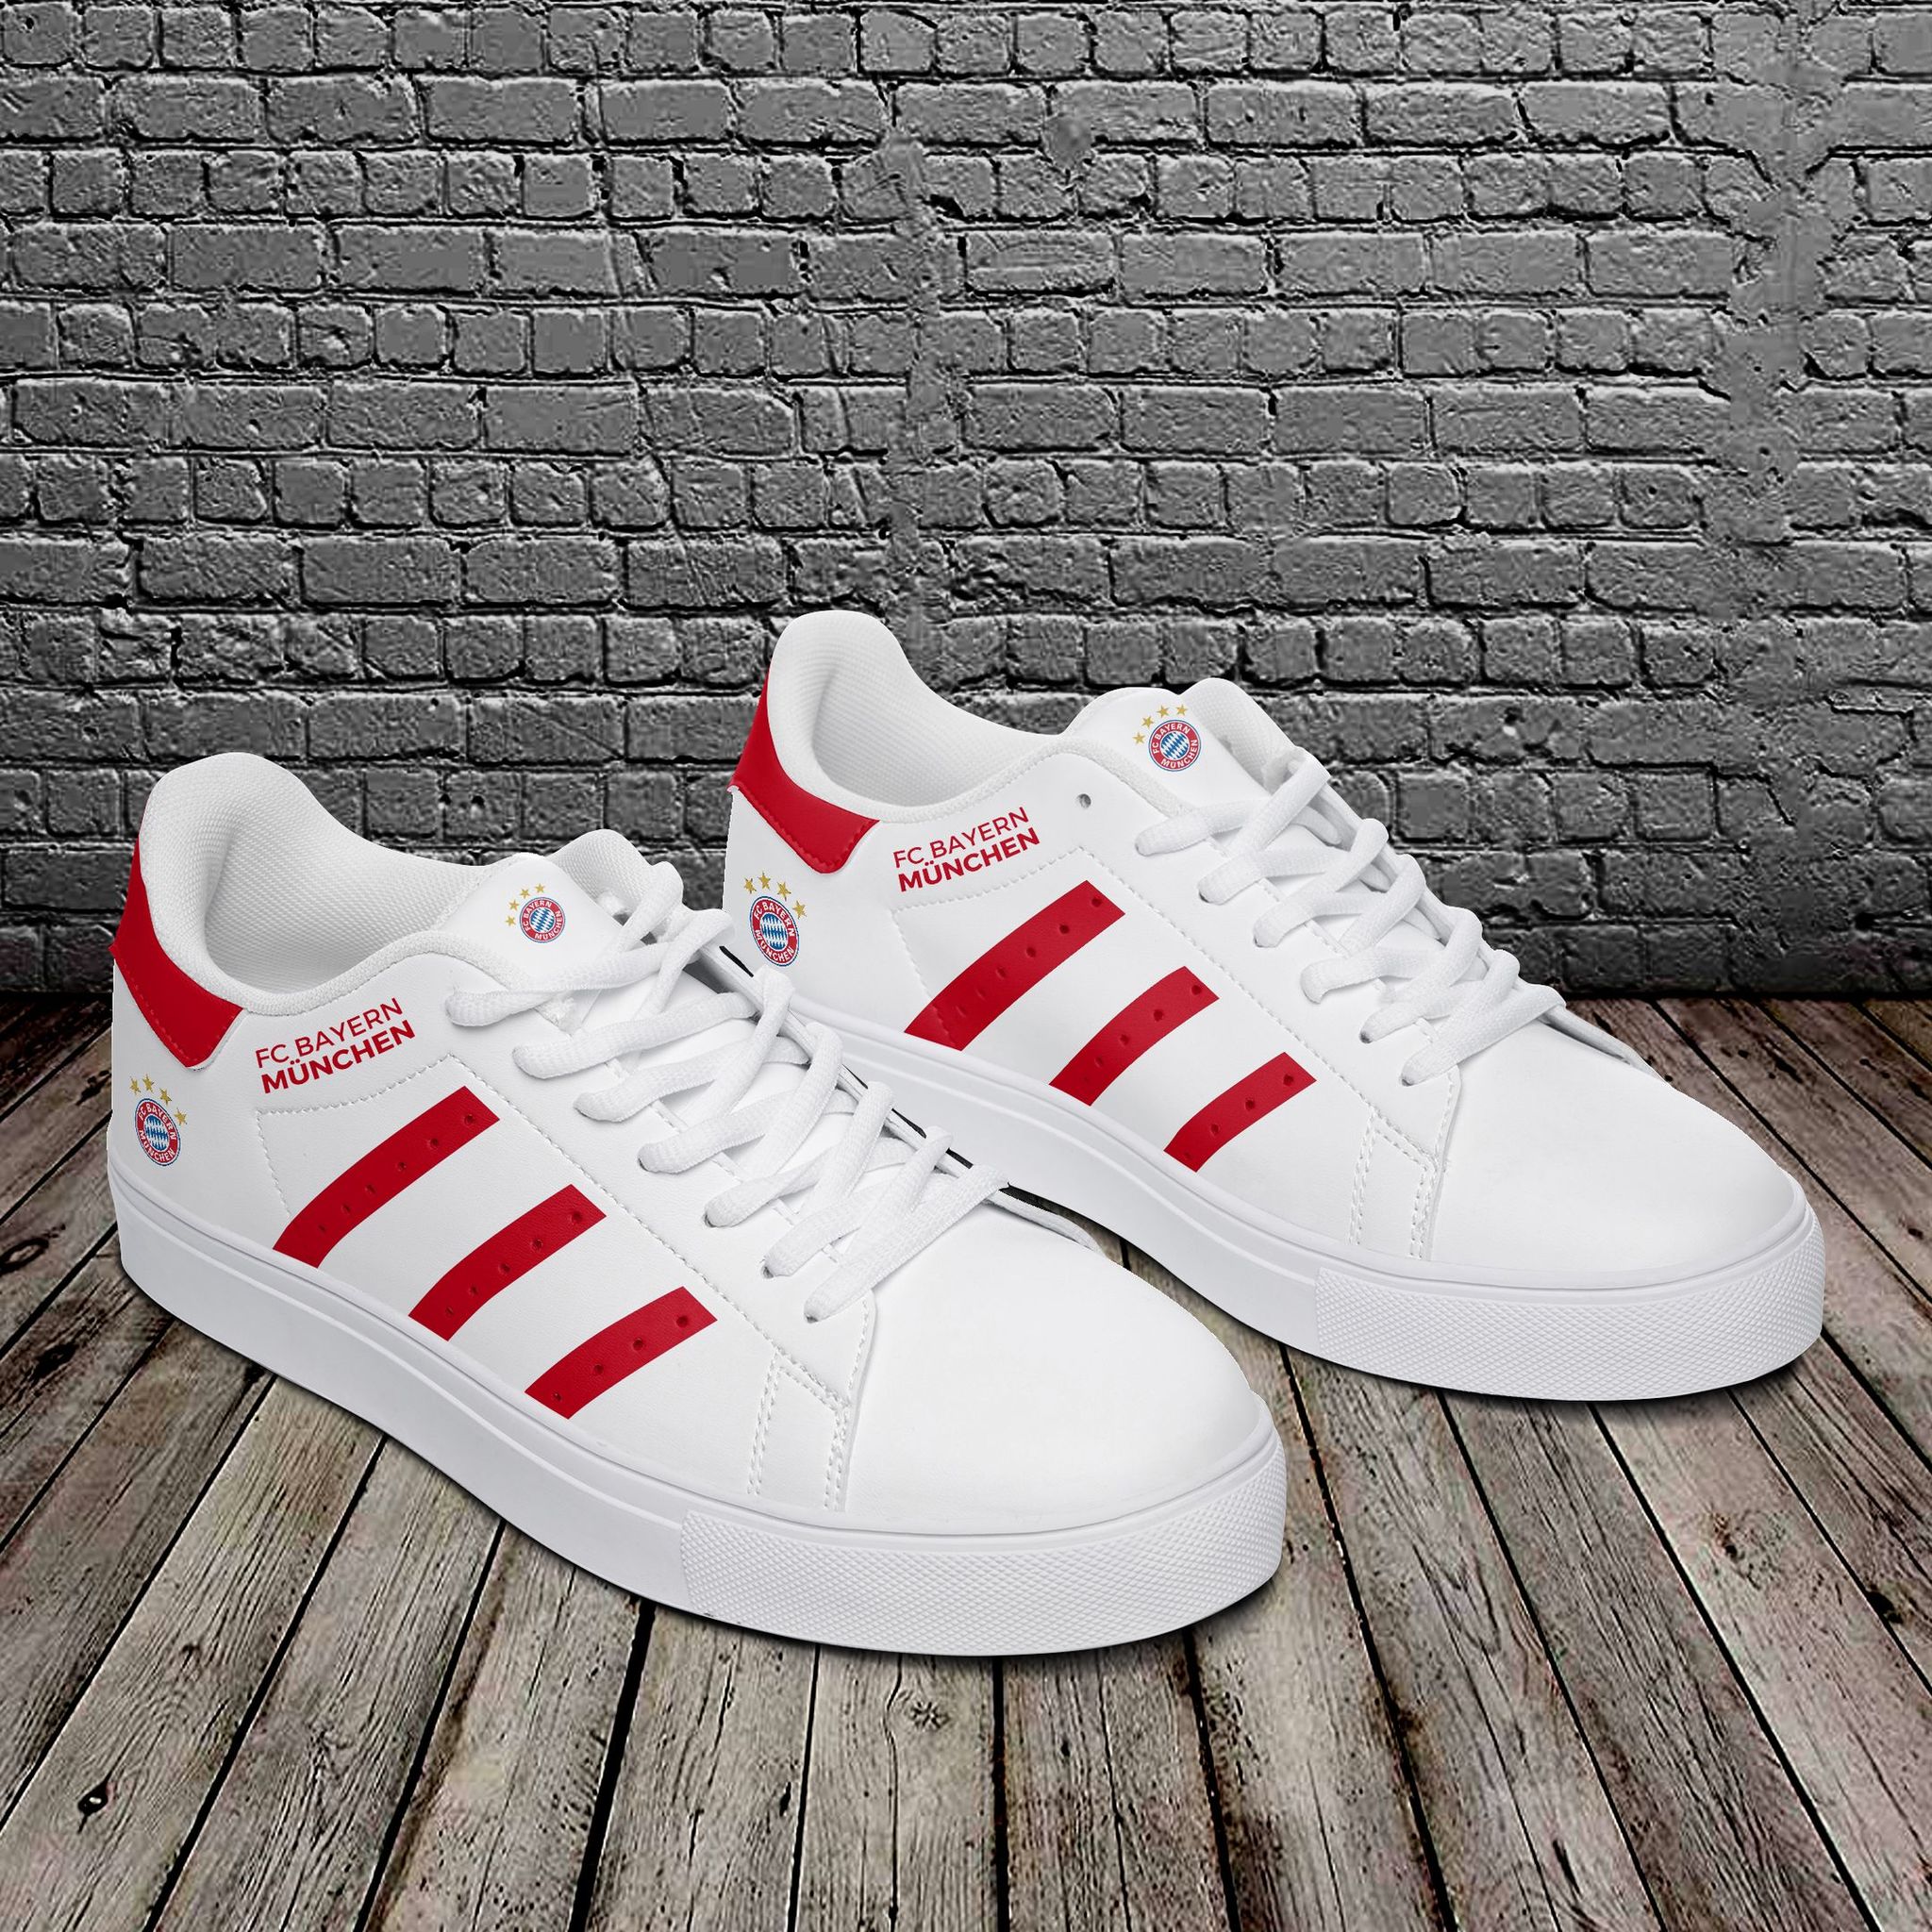 FC Bayern Muchen stan smith low top shoes 2.1